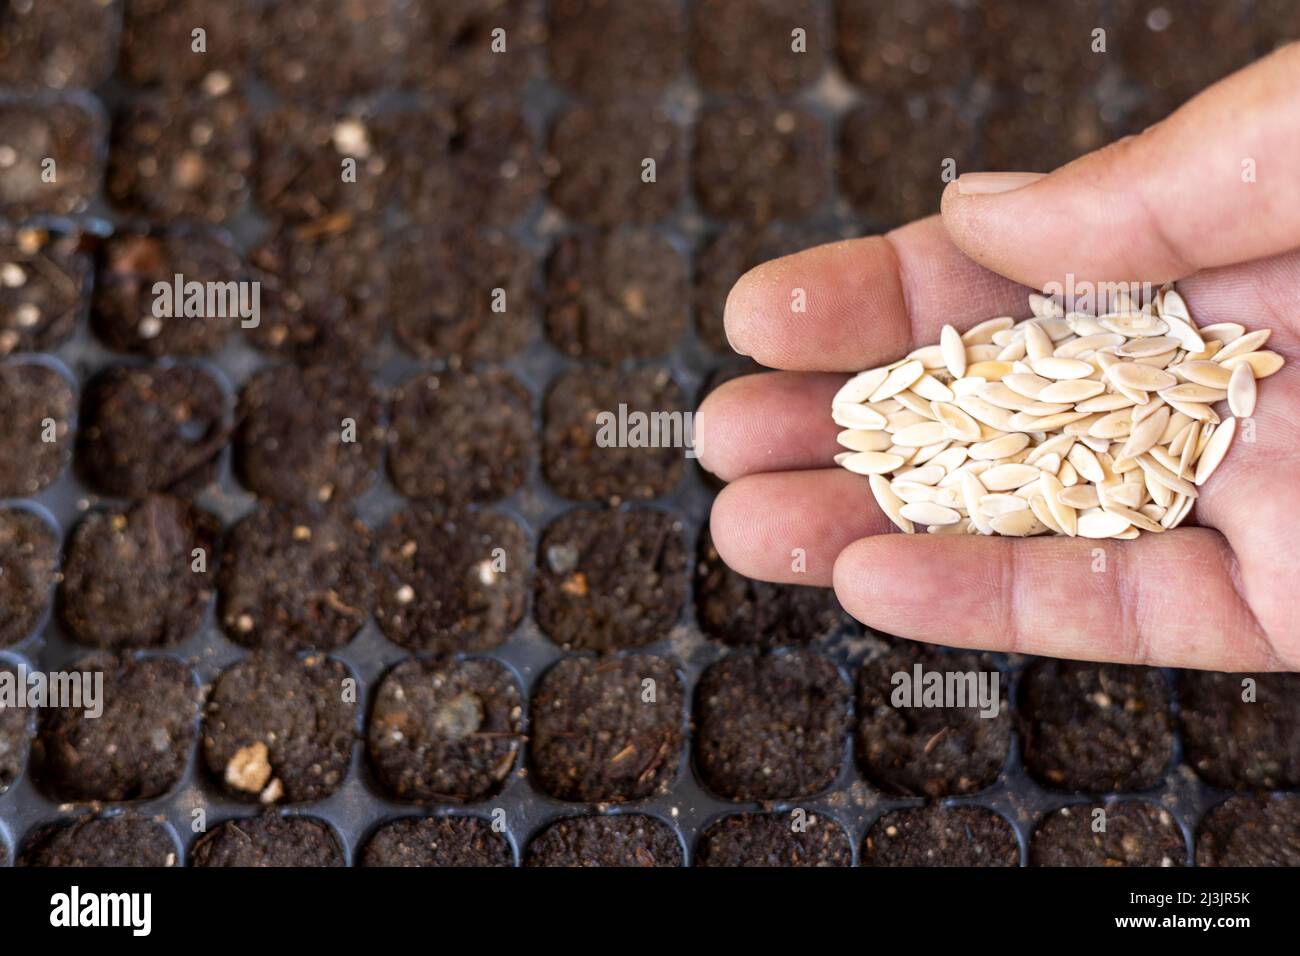 Sowing cucumber seeds in a tray for seedlings Stock Photo